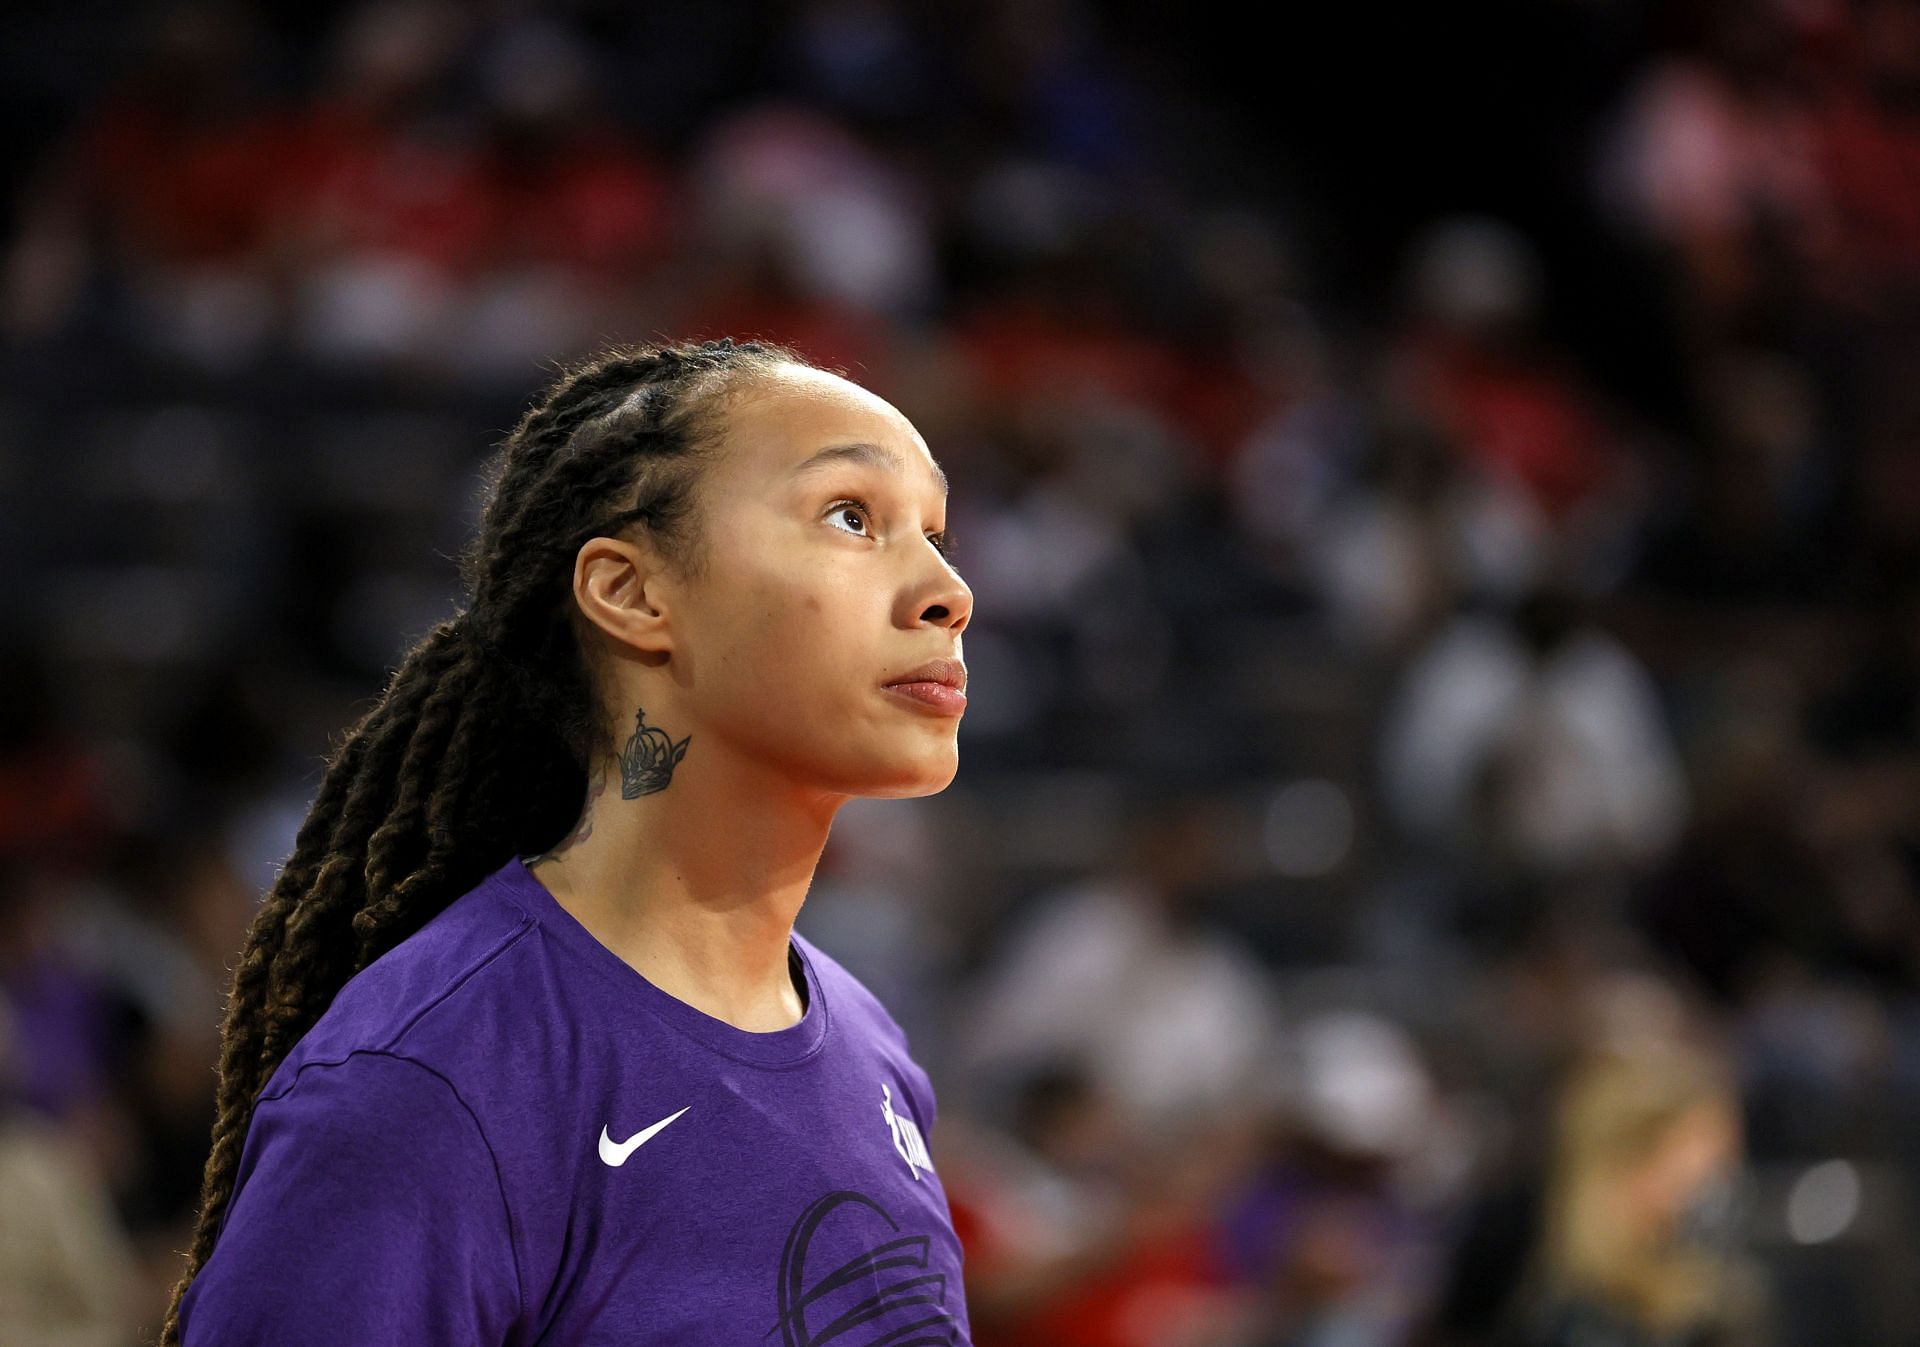 The WNBA star was detained in February (Image via Getty Images)